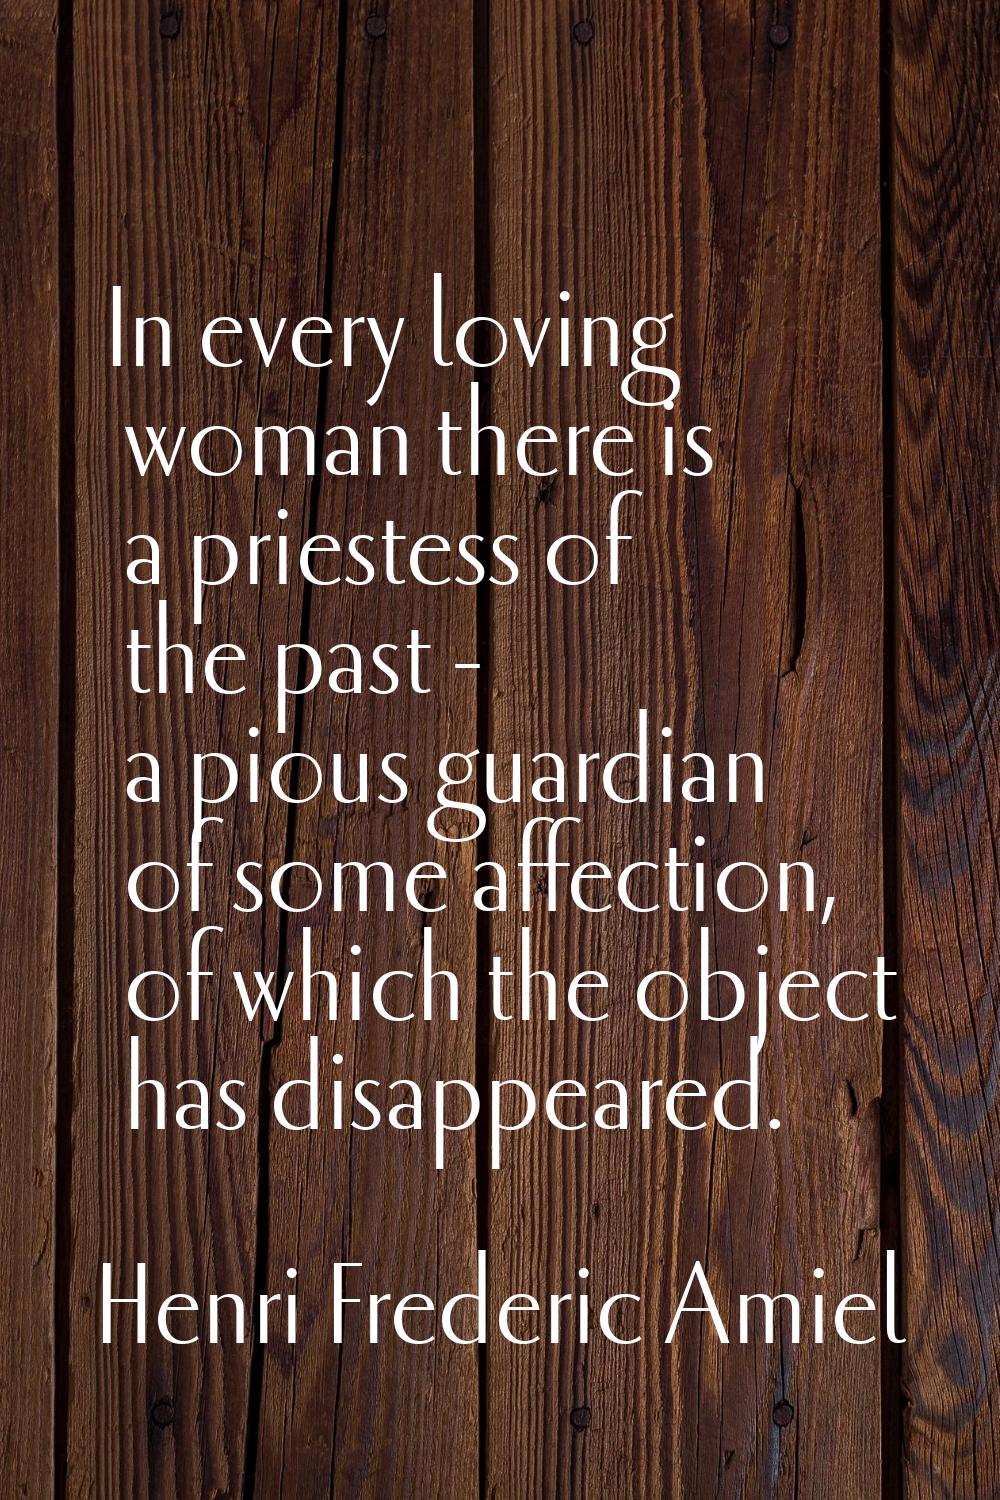 In every loving woman there is a priestess of the past - a pious guardian of some affection, of whi